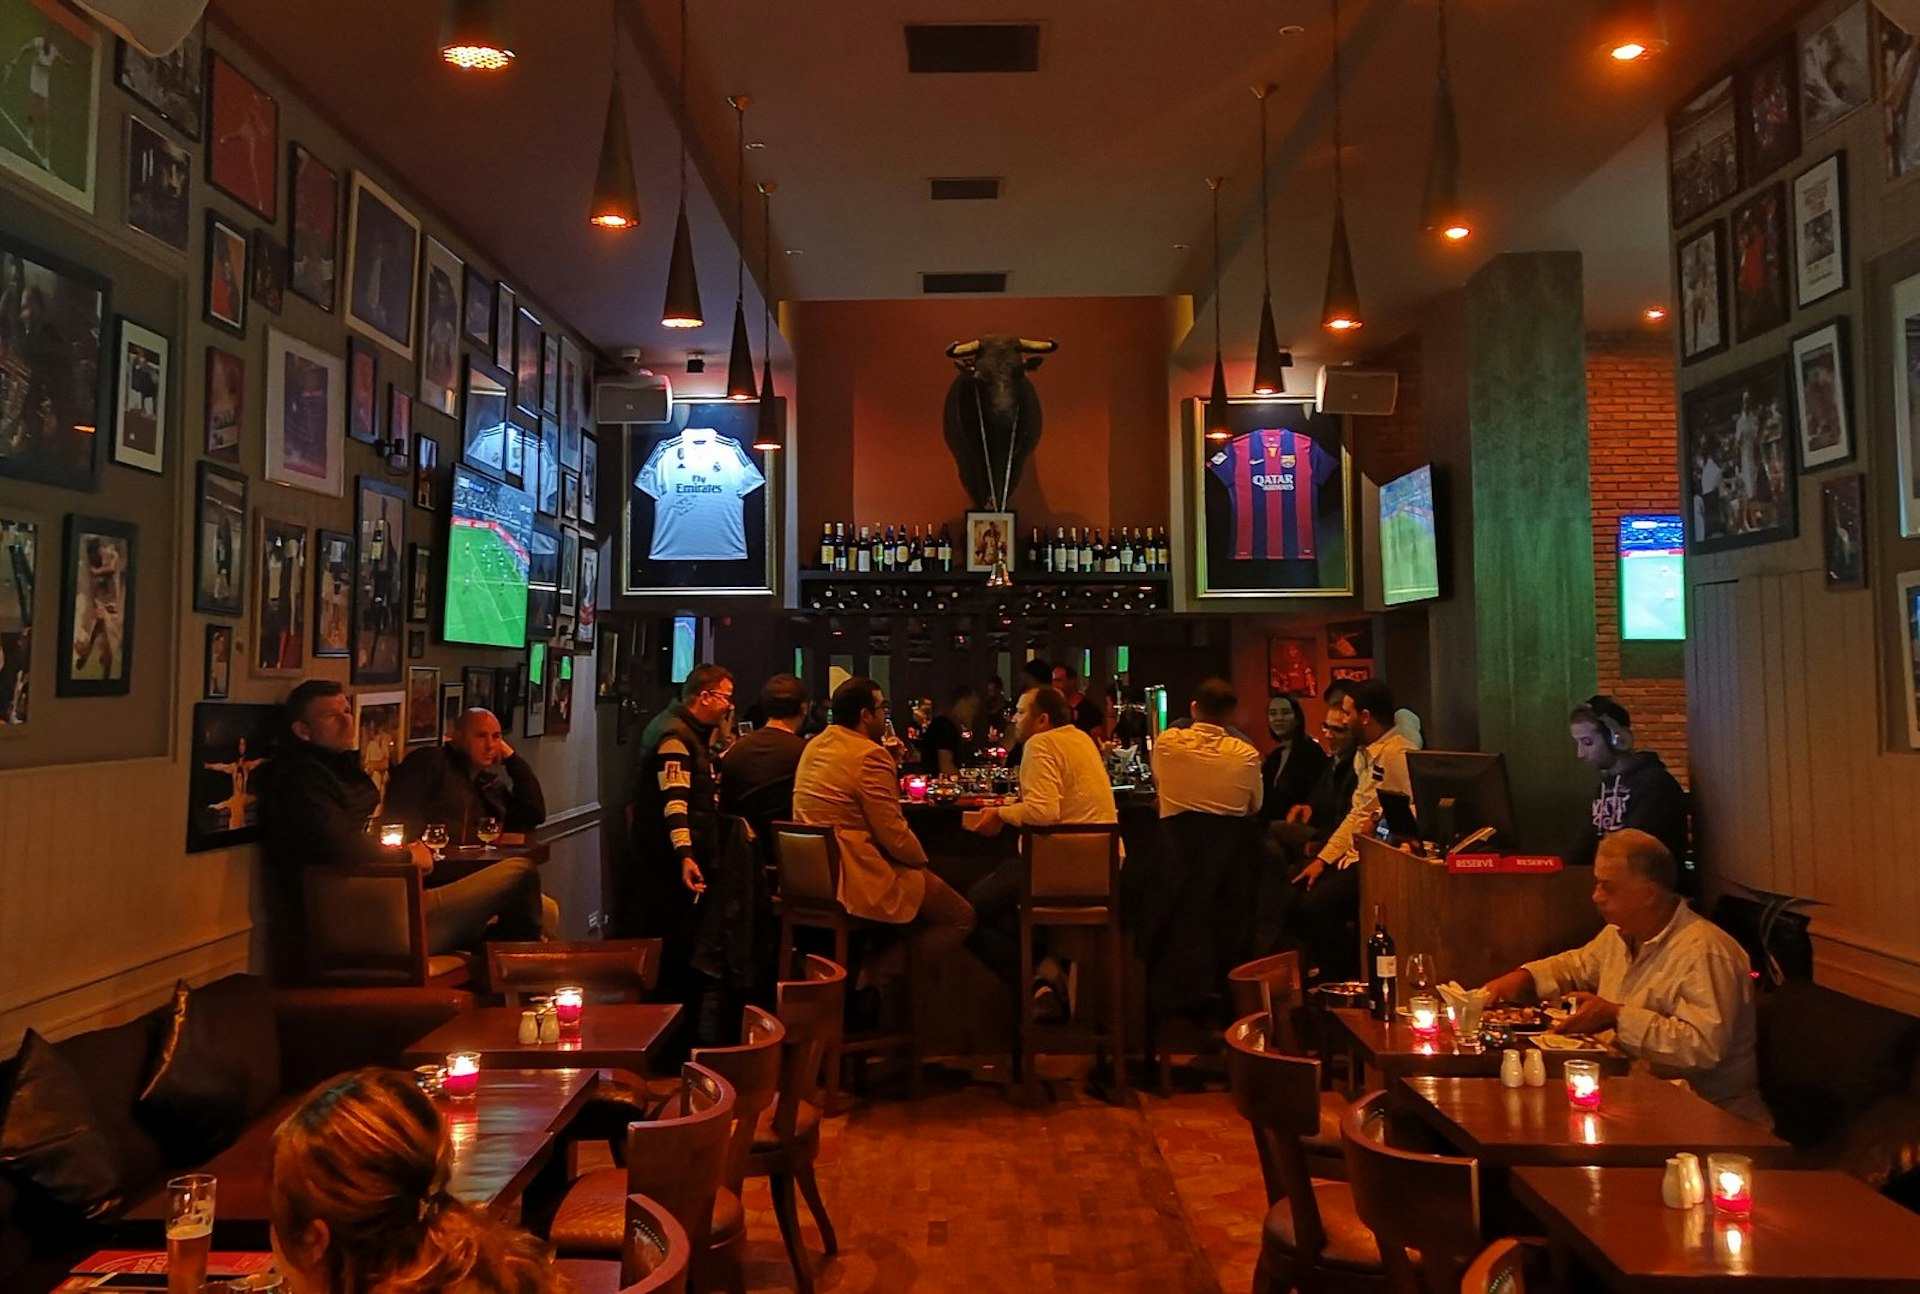 Customers gathered around a bar watching football at L'Auberge Espagnole, Marrakesh, Morocco